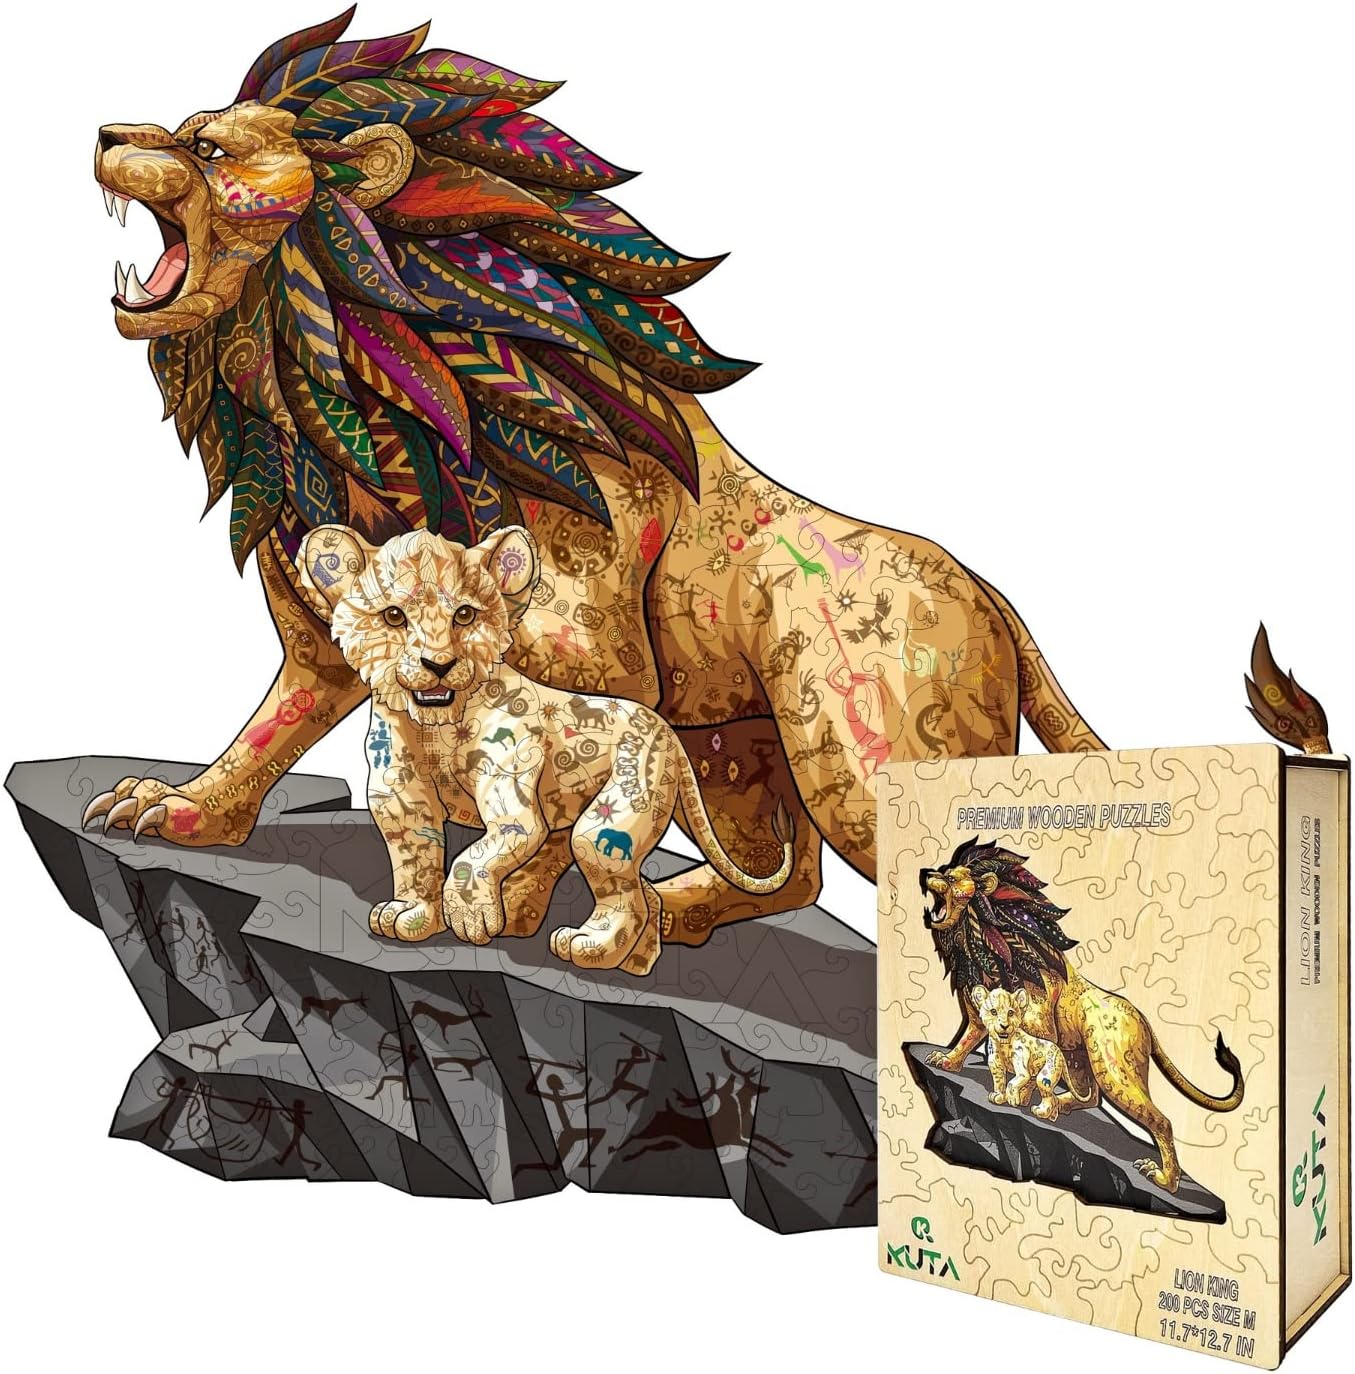 KUTA Wooden Jigsaw Puzzles, Unique Animal Shape, Set with Wall Mounting Kits for Decoration, Best Gift for Children and Adults (Lion King)